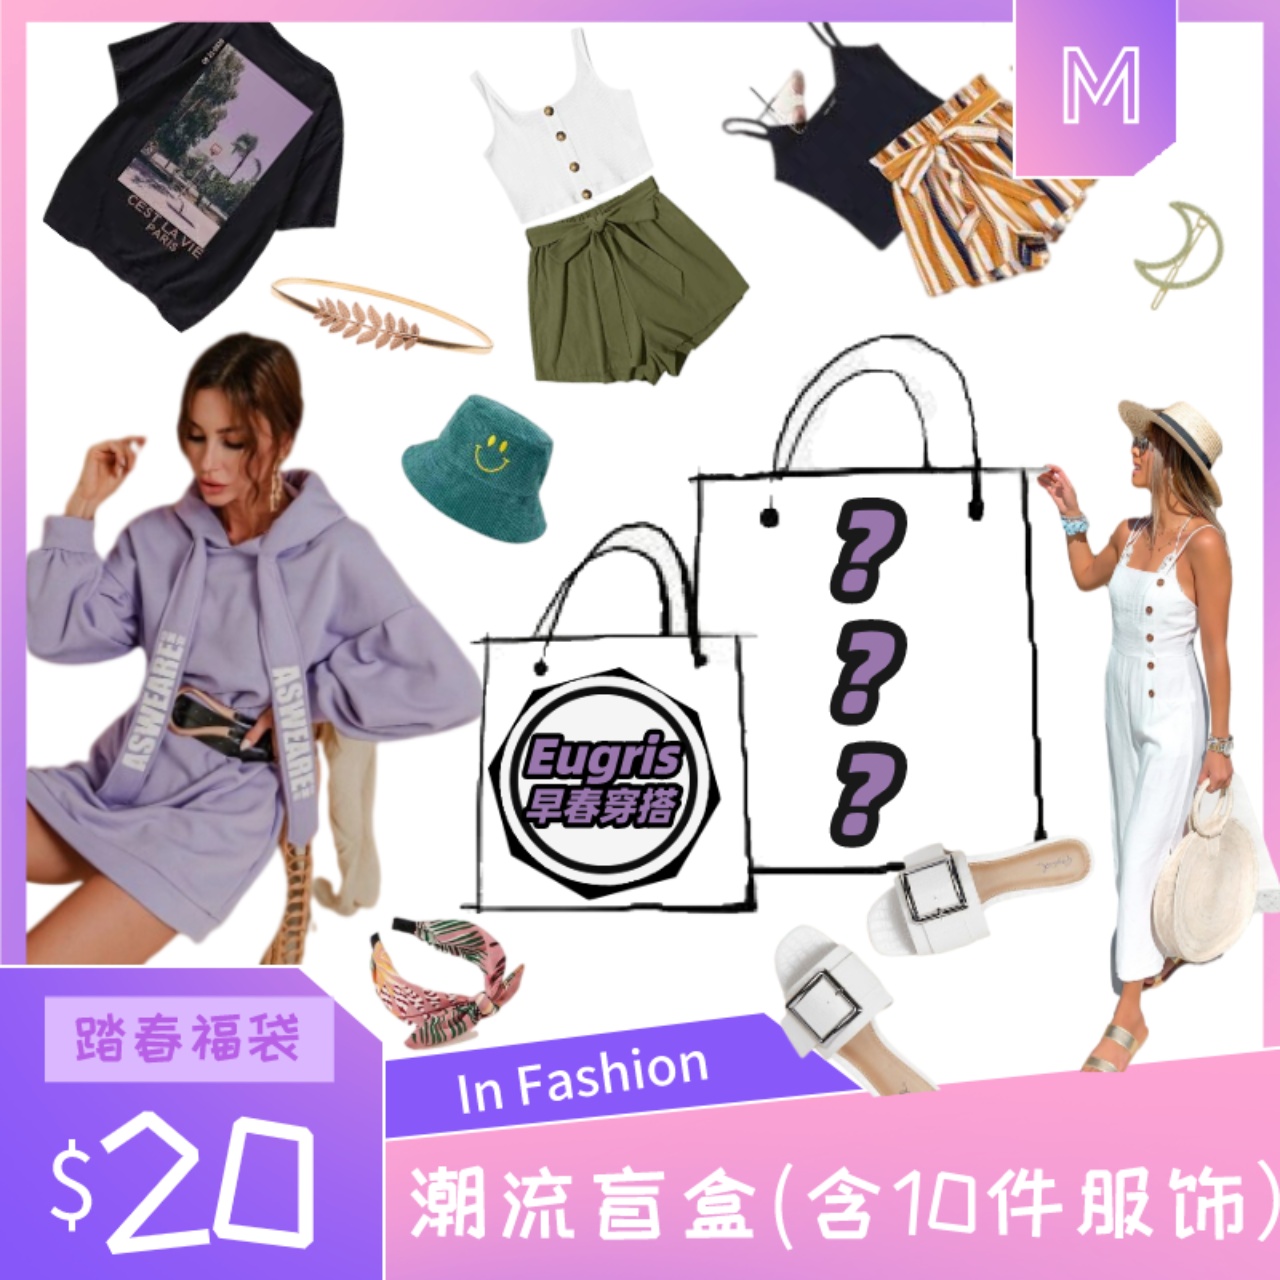 Fashion lind box (including 10 clothing & accessories)